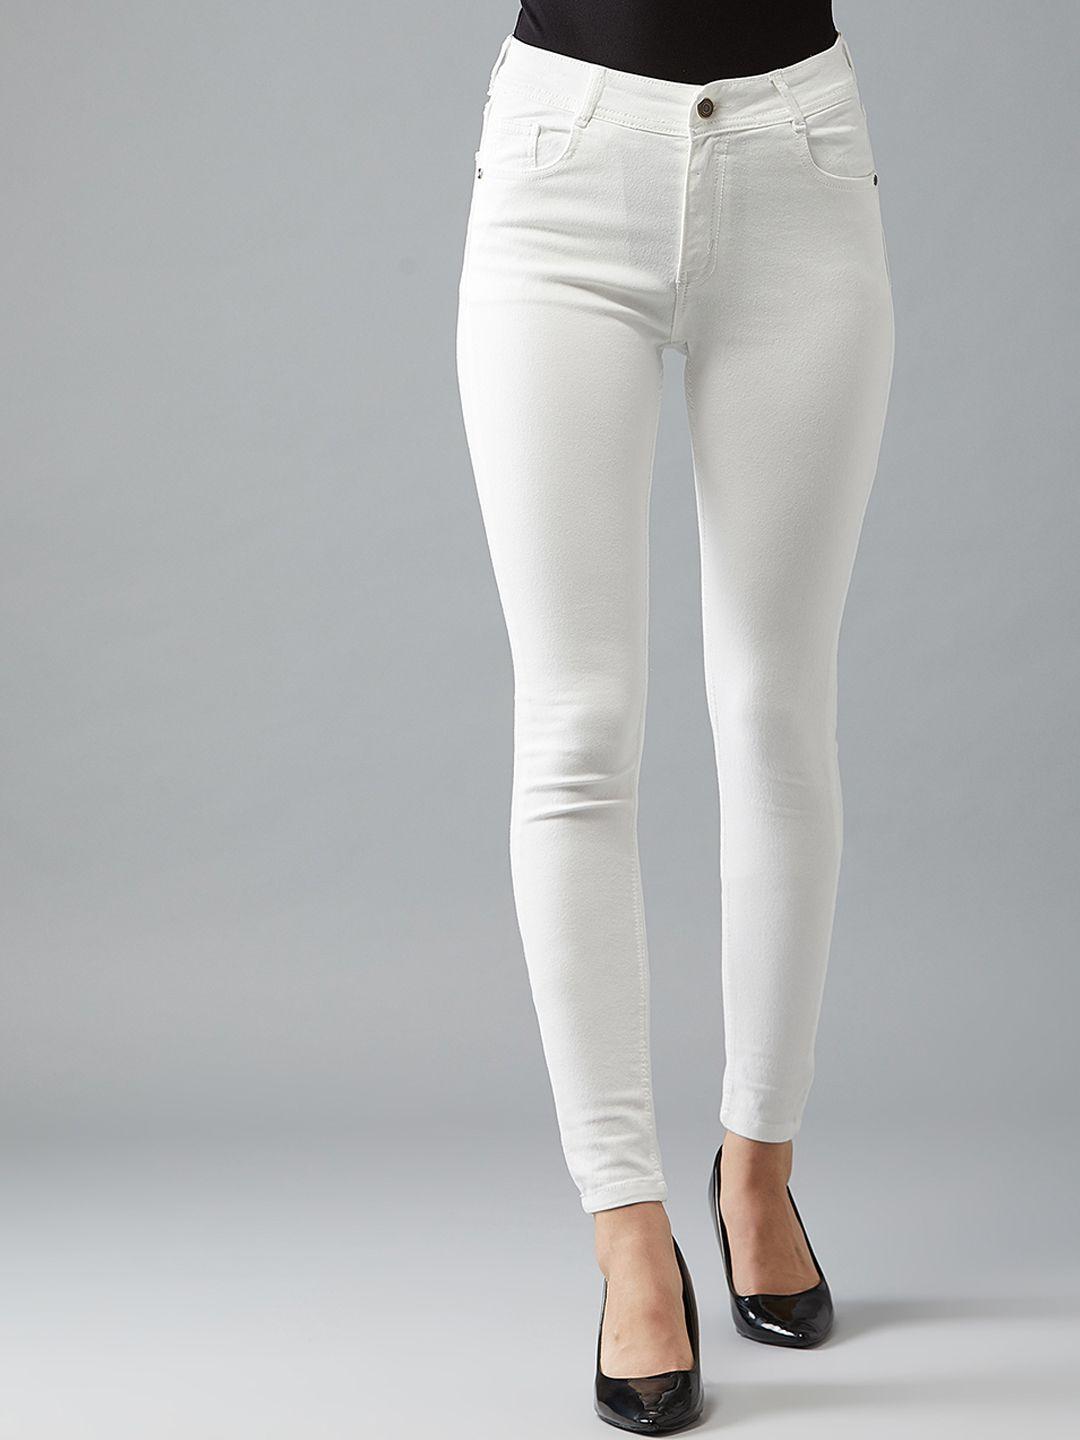 dolce-crudo-women-white-skinny-fit-mid-rise-clean-look-stretchable-jeans